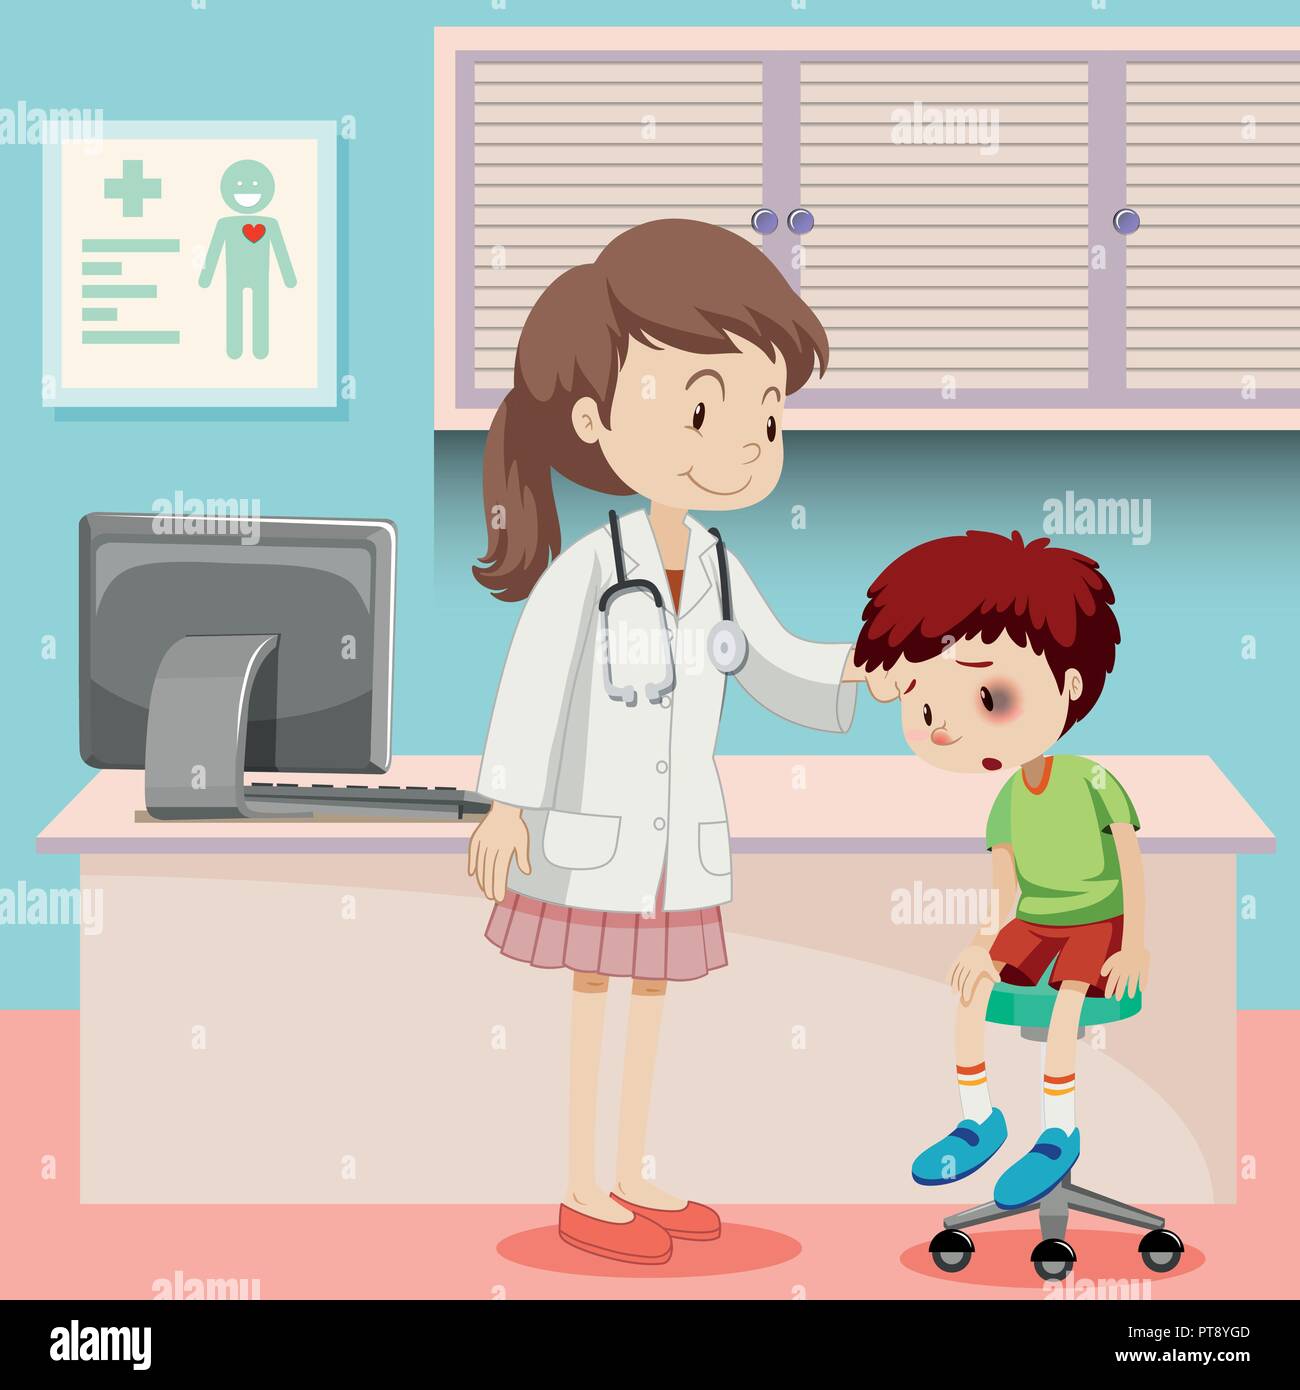 Doctor helping boy with bruise illustration Stock Vector